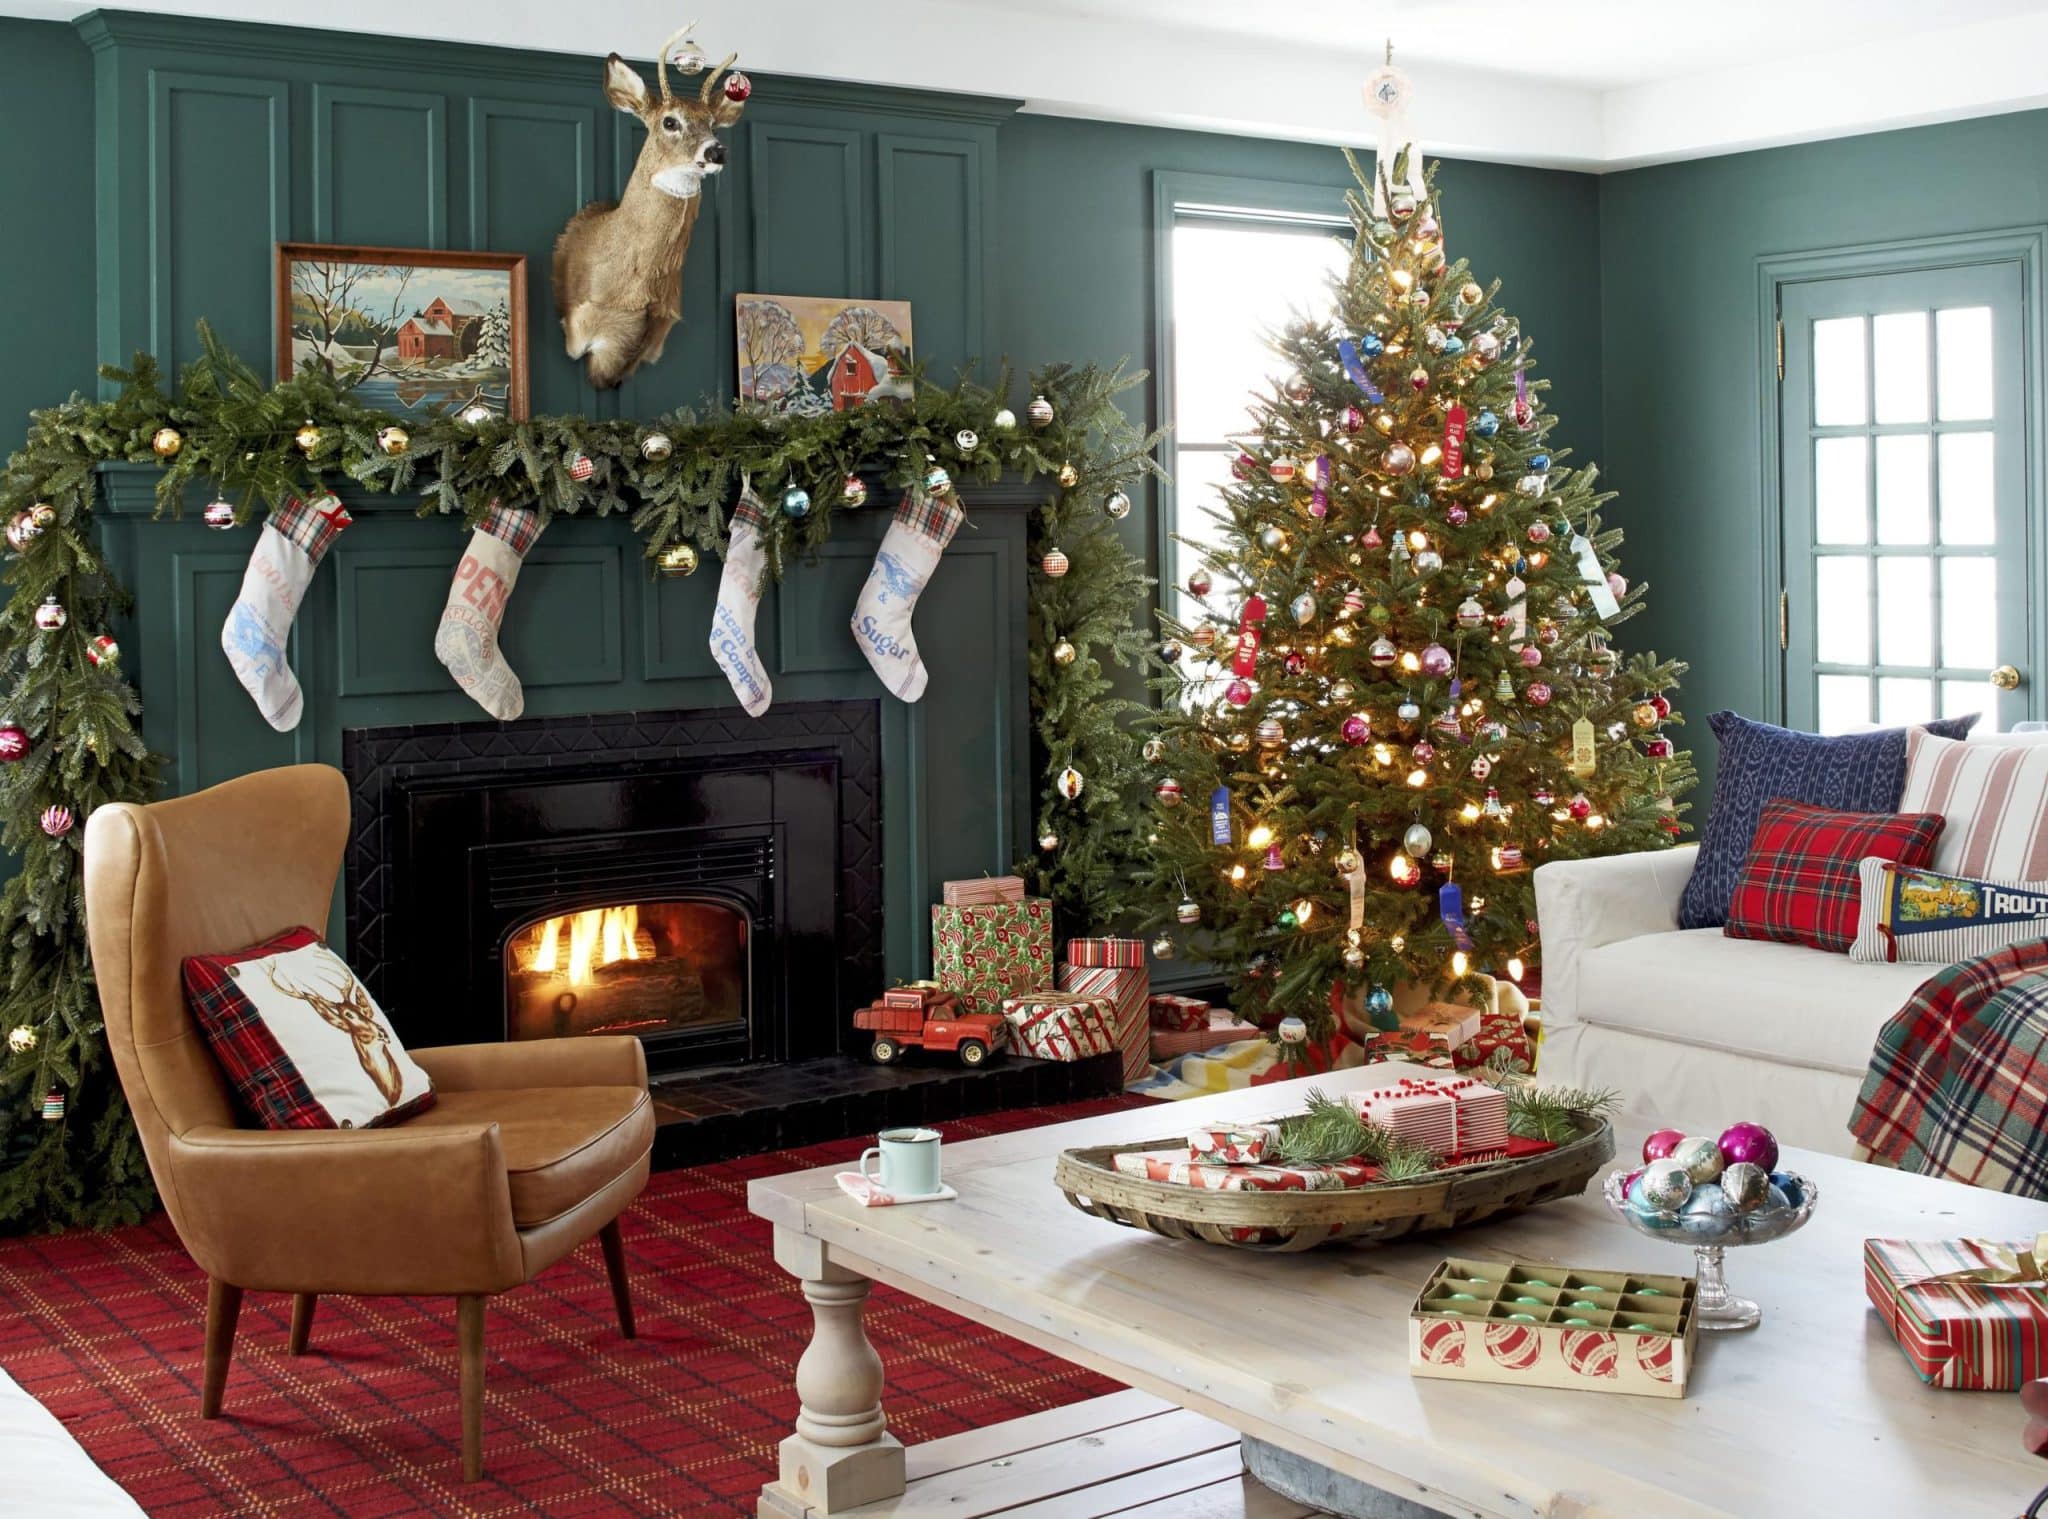 21 Way to Glam Up Your Christmas Decor